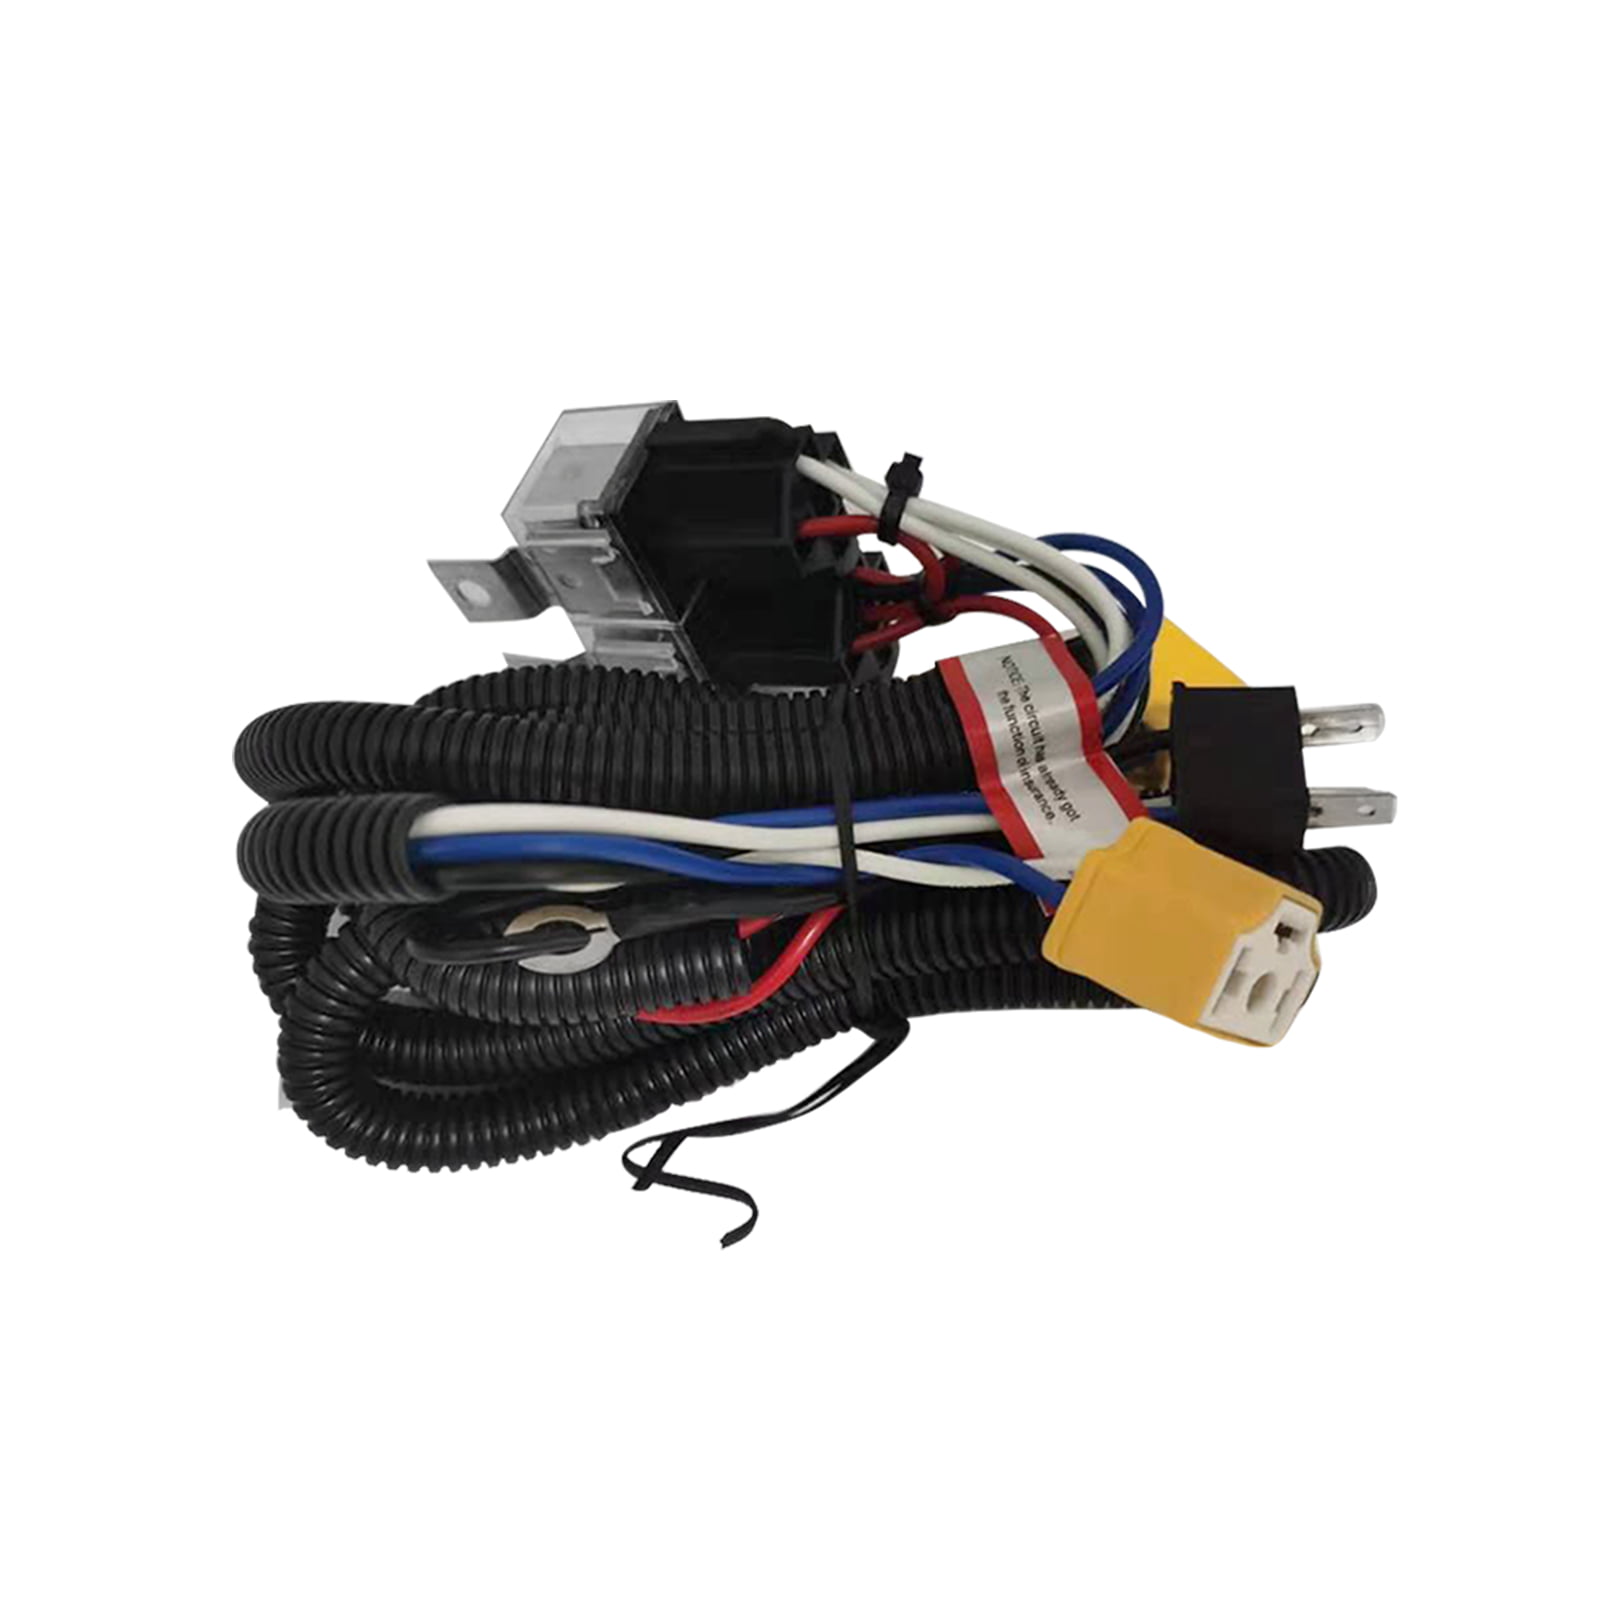 HELLA LIGHT WIRING HARNESS DOUBLE FUSE AND RELAY WITH CERAMIC SOCKETS 130W 